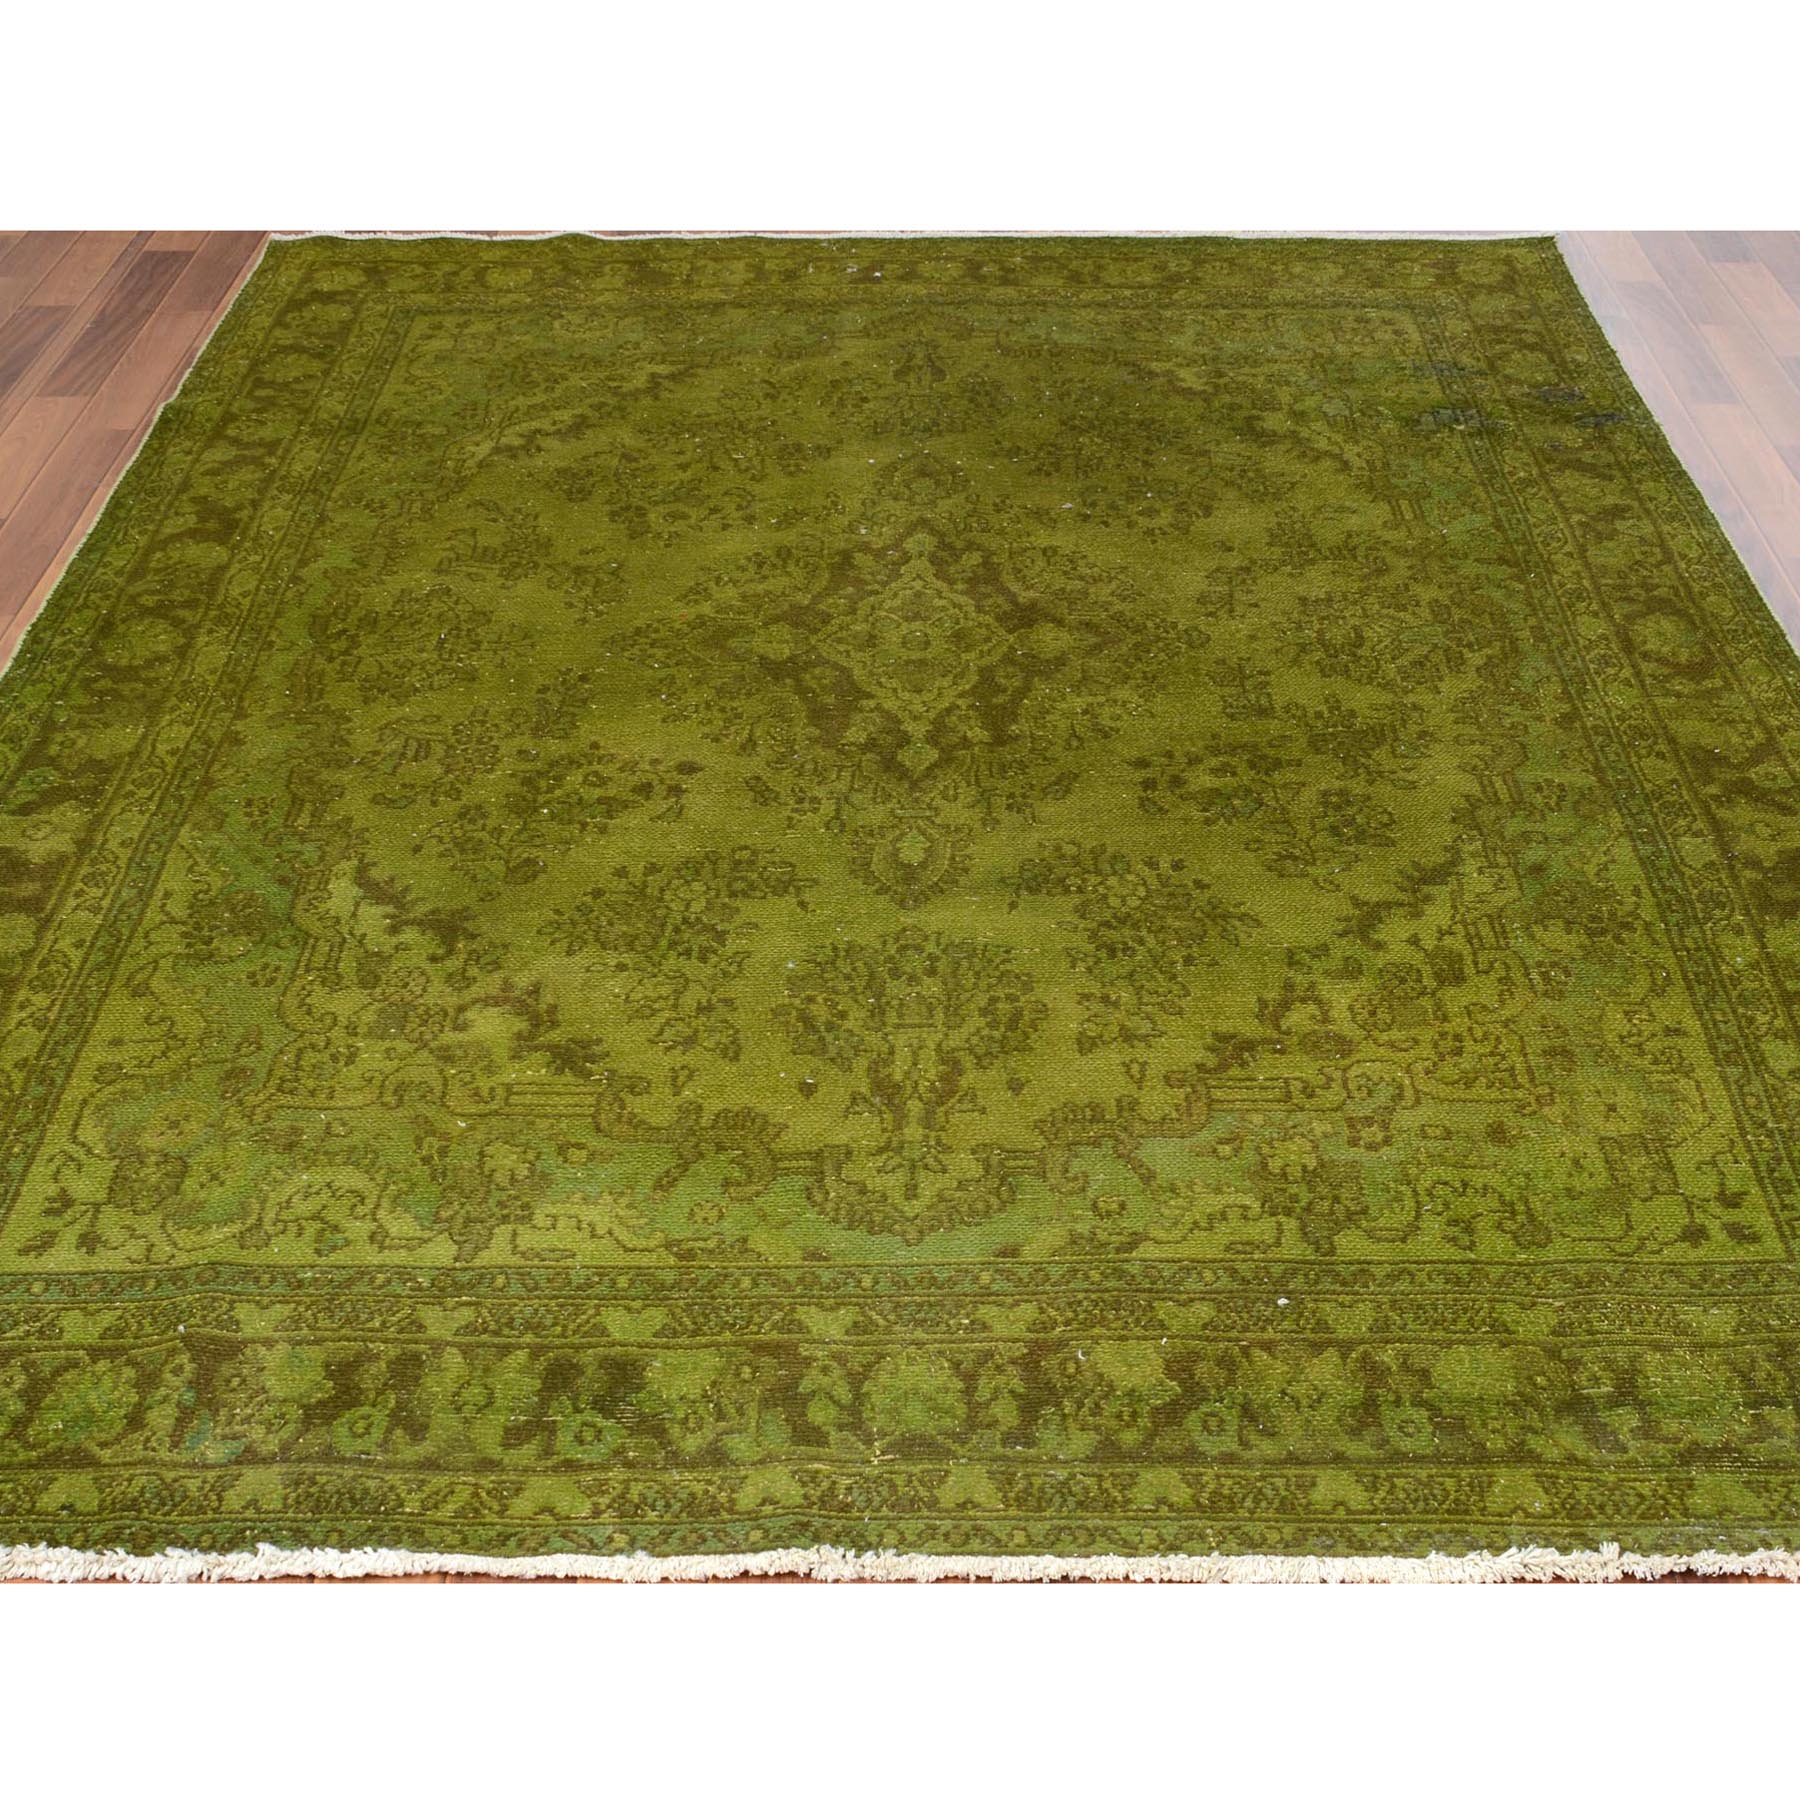 6-10 x10- Green Overdyed and Vintage Worn Down Persian Bibikabad Hand Knotted Oriental Rug 